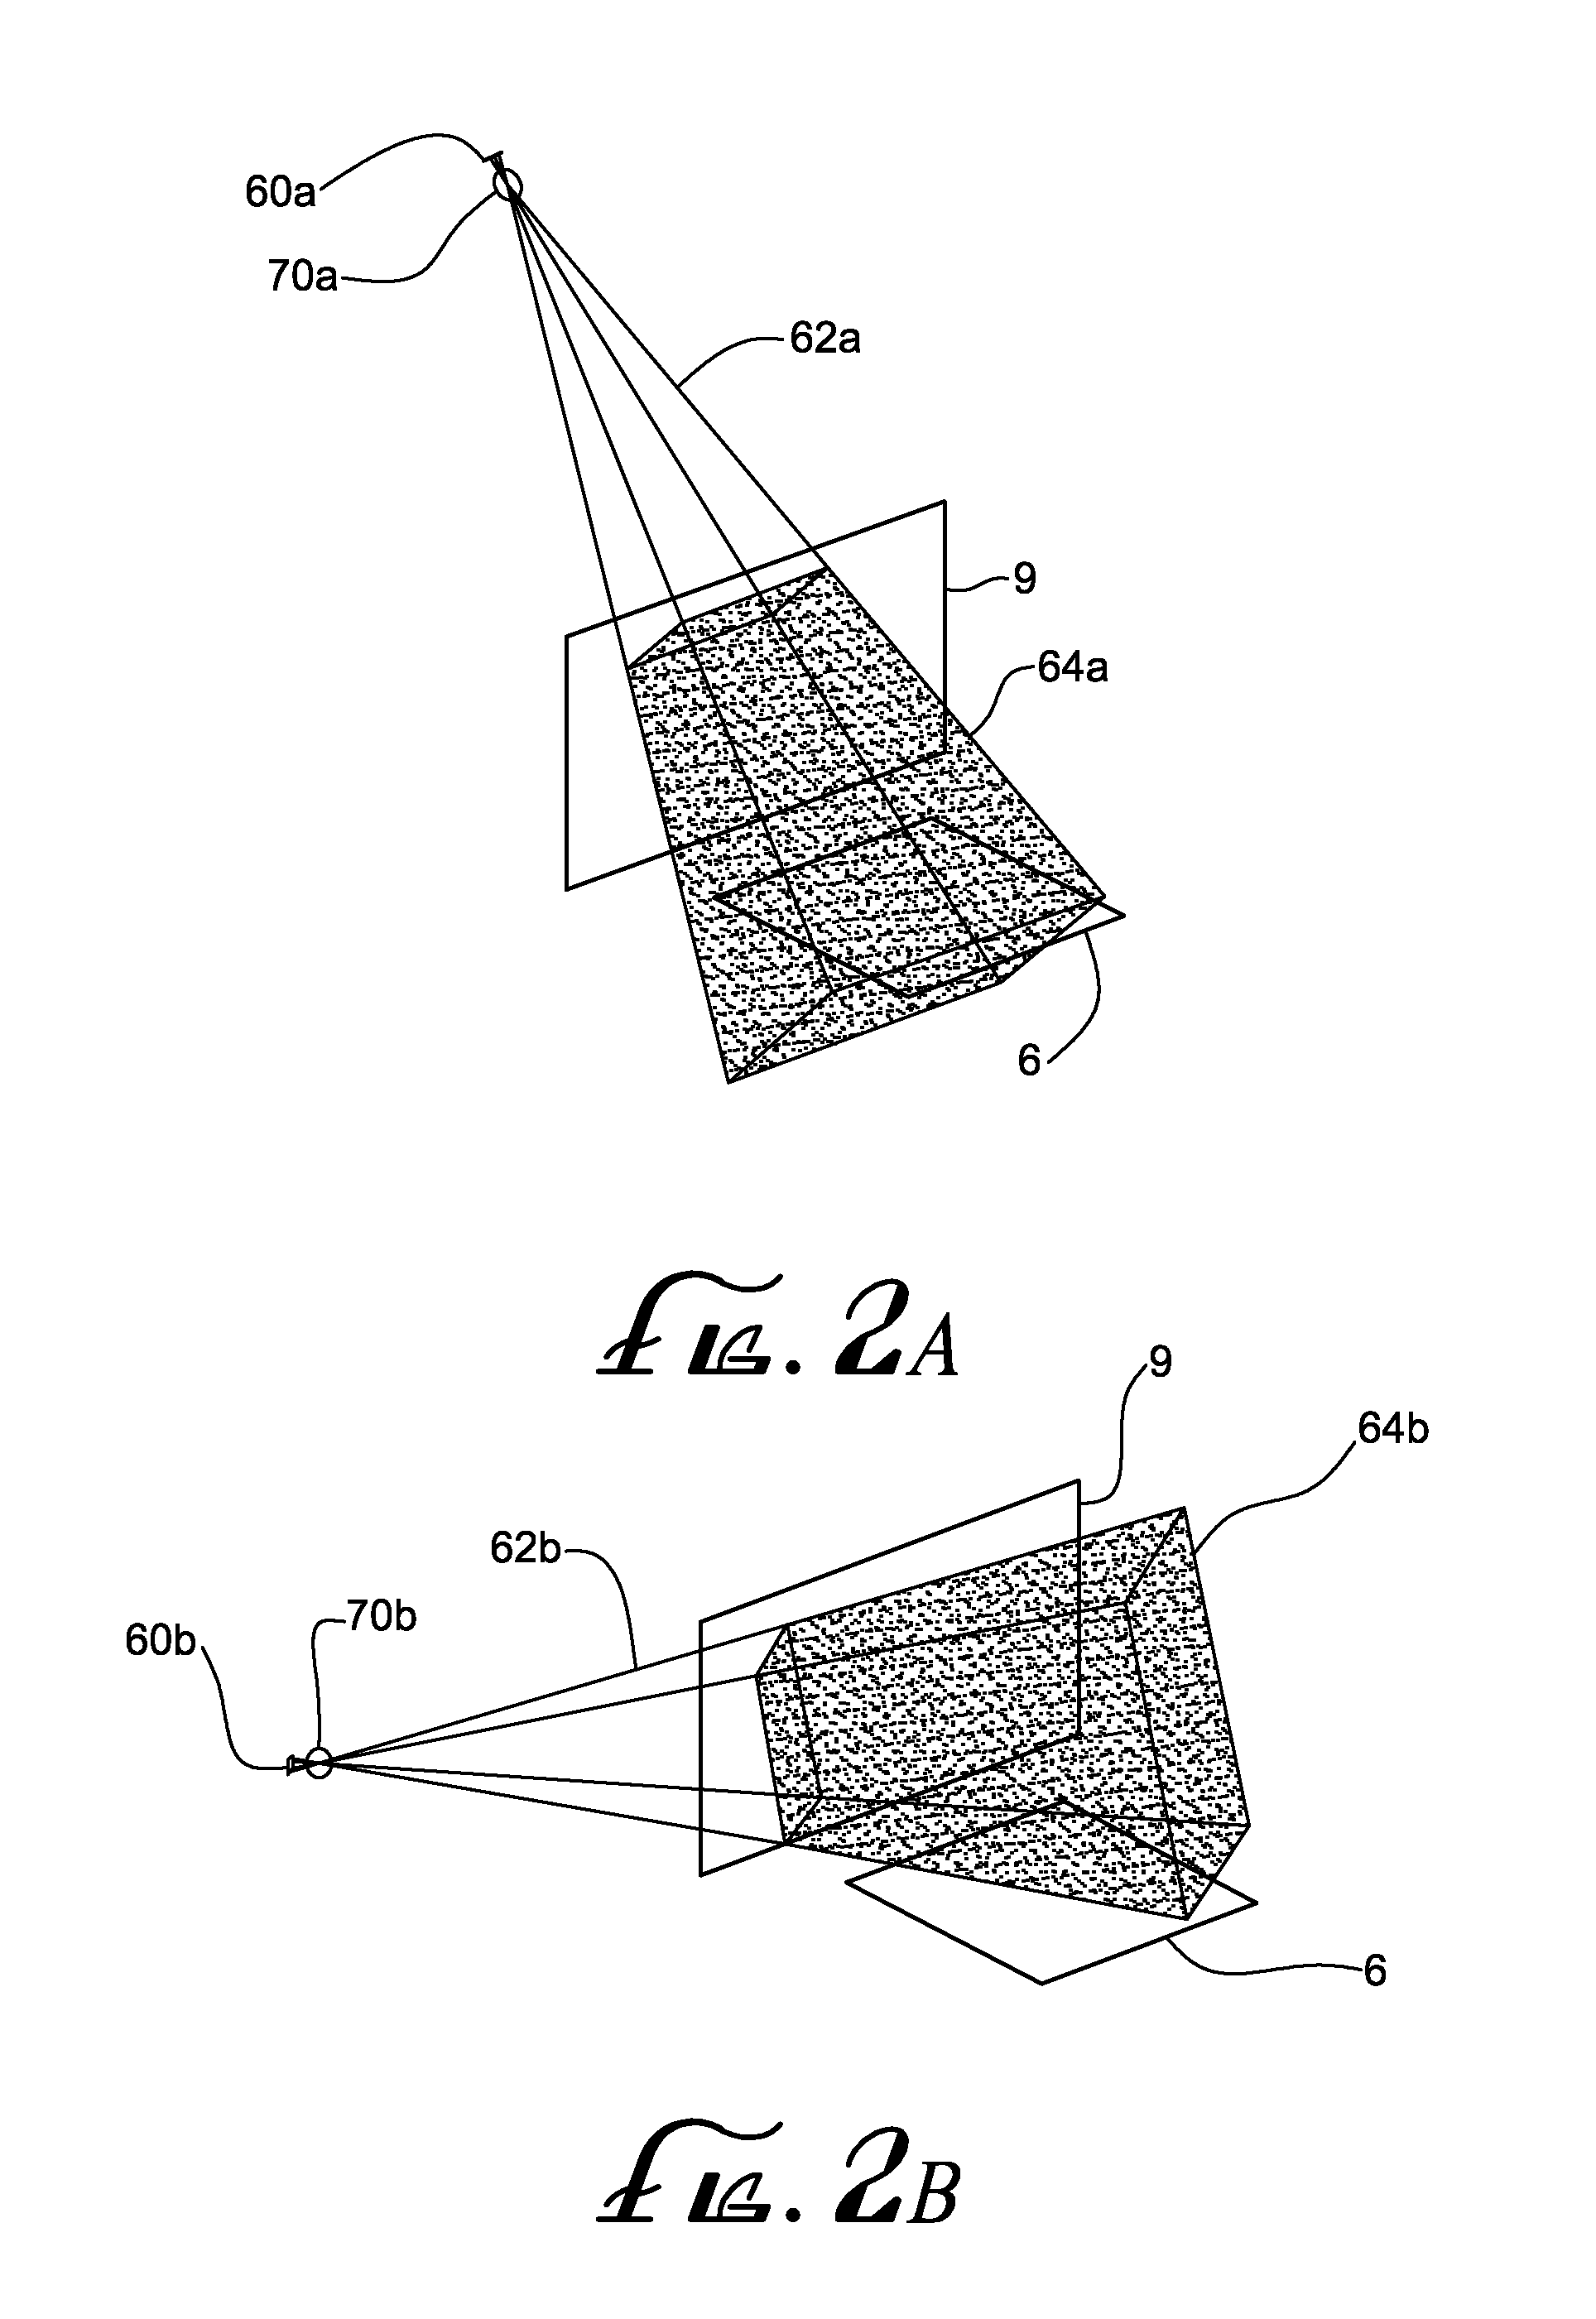 Two-plane optical code reader for acquisition of multiple views an object